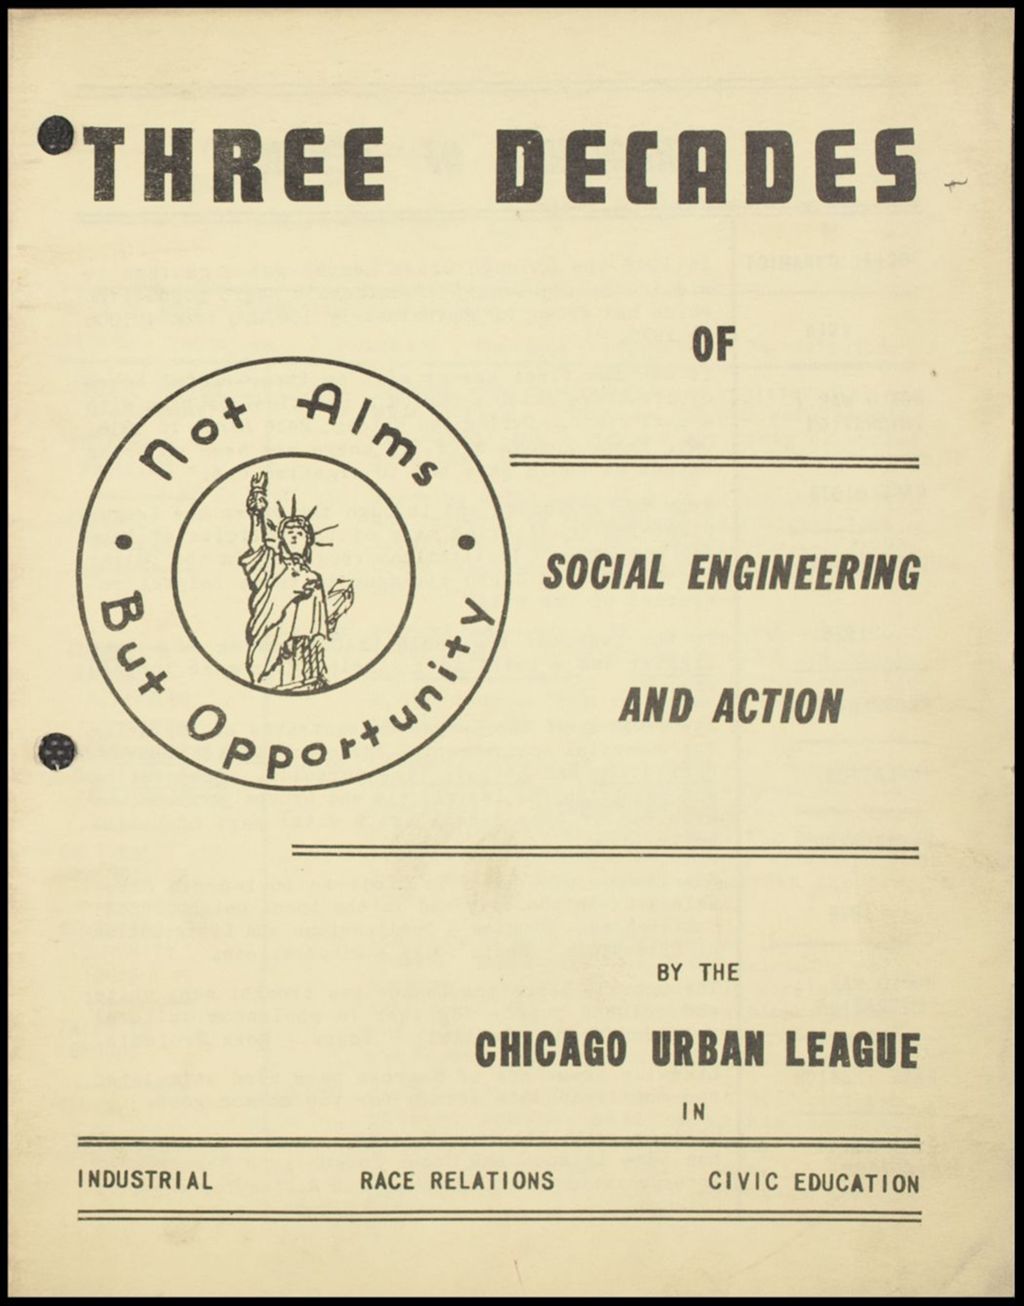 Miniature of Three Decades of Social Engineering and Action, 1947 (Folder I-18)